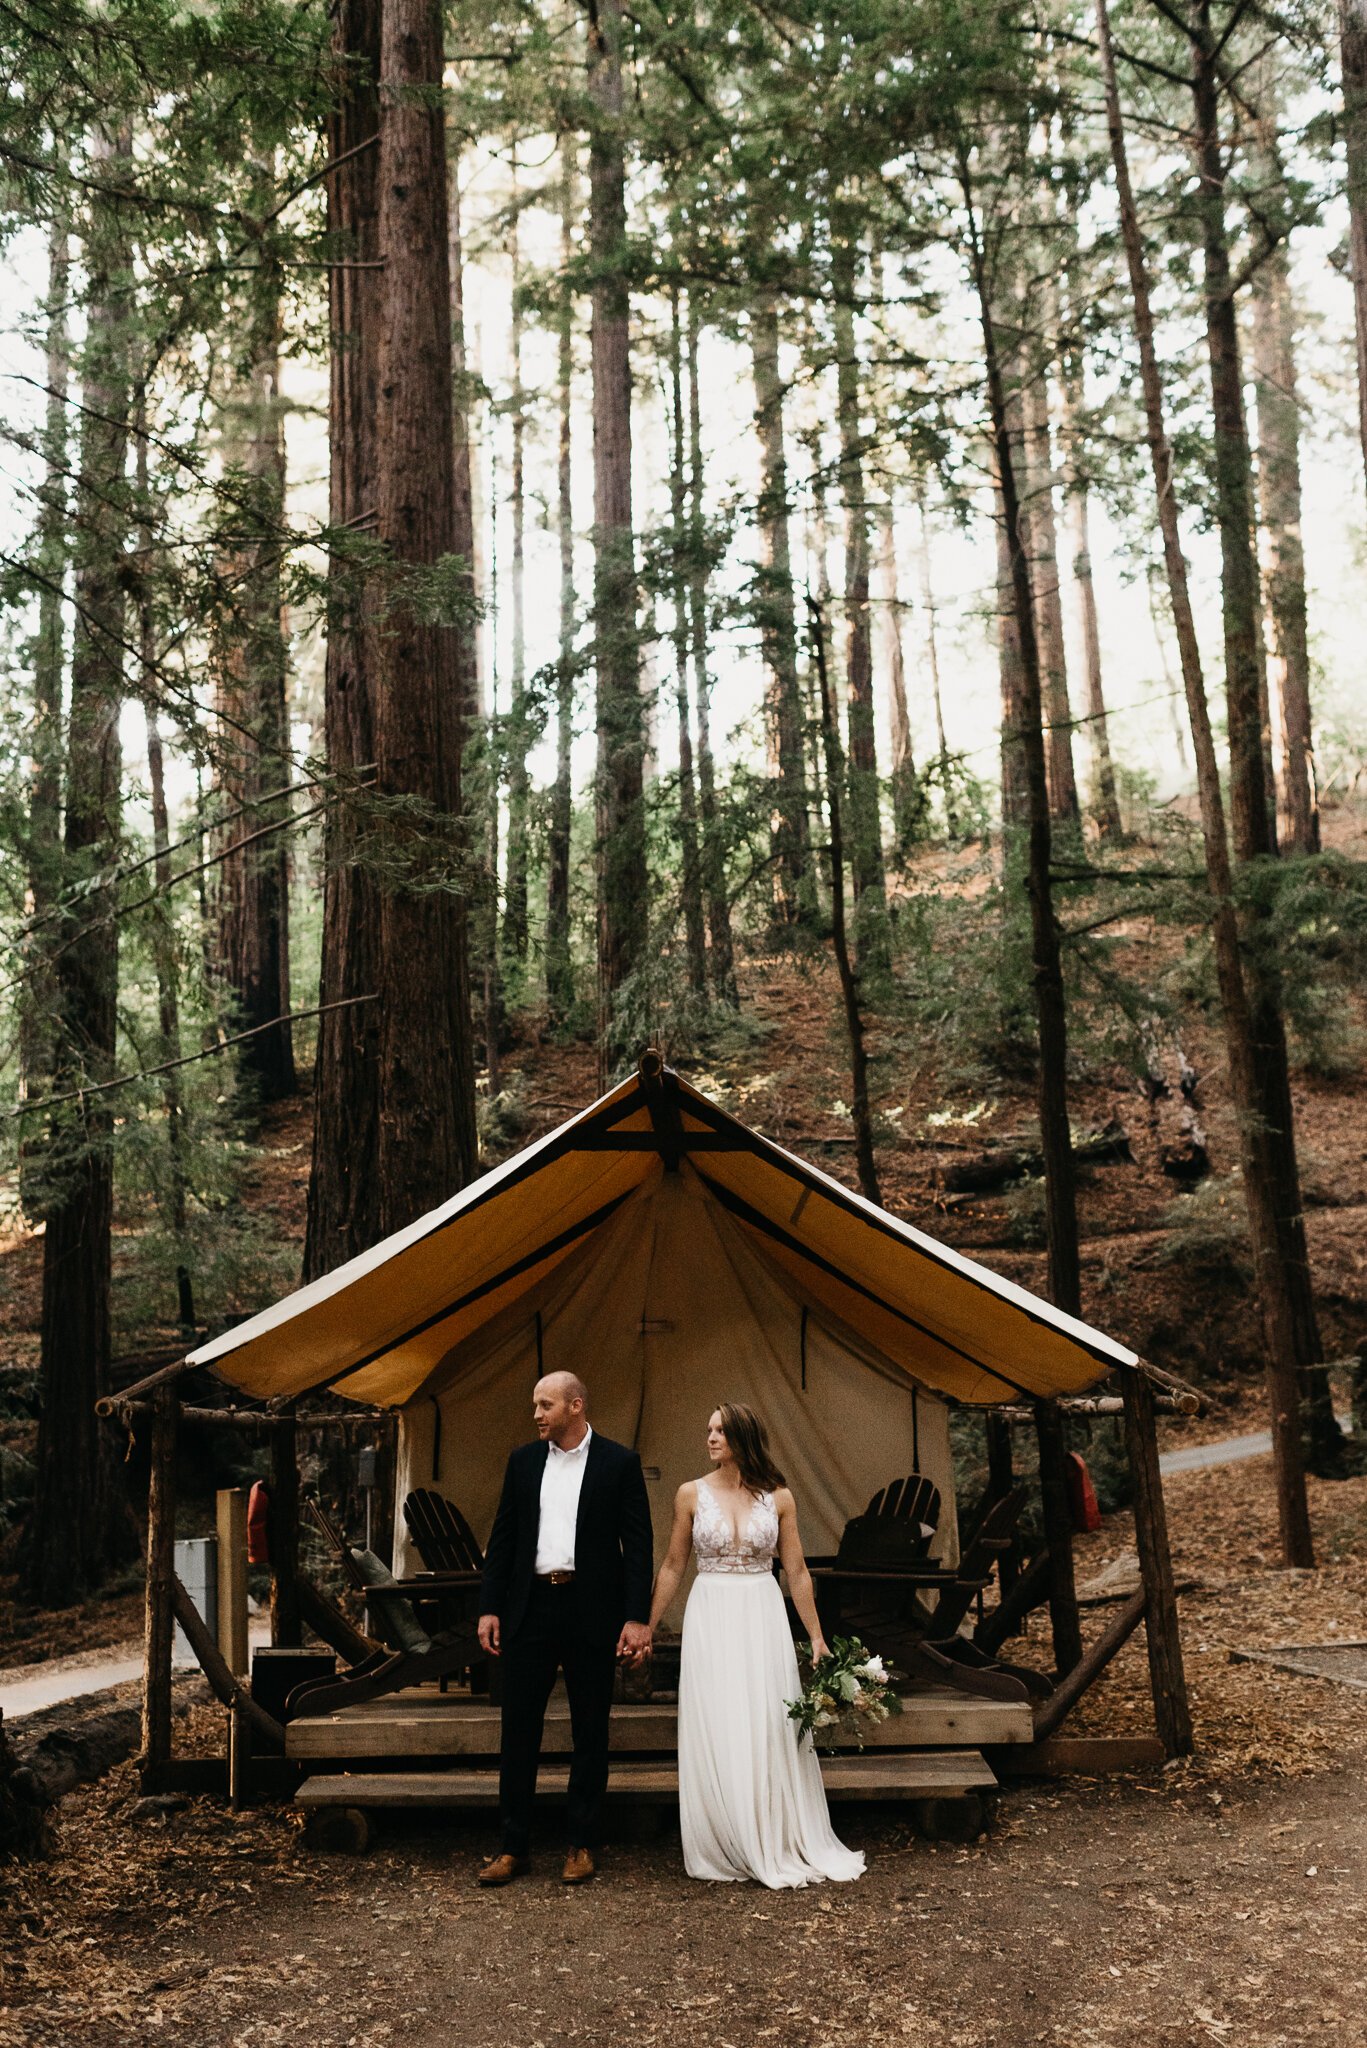 newly married couple in wedding attire in front of clamping tent in Ventana Big Sur